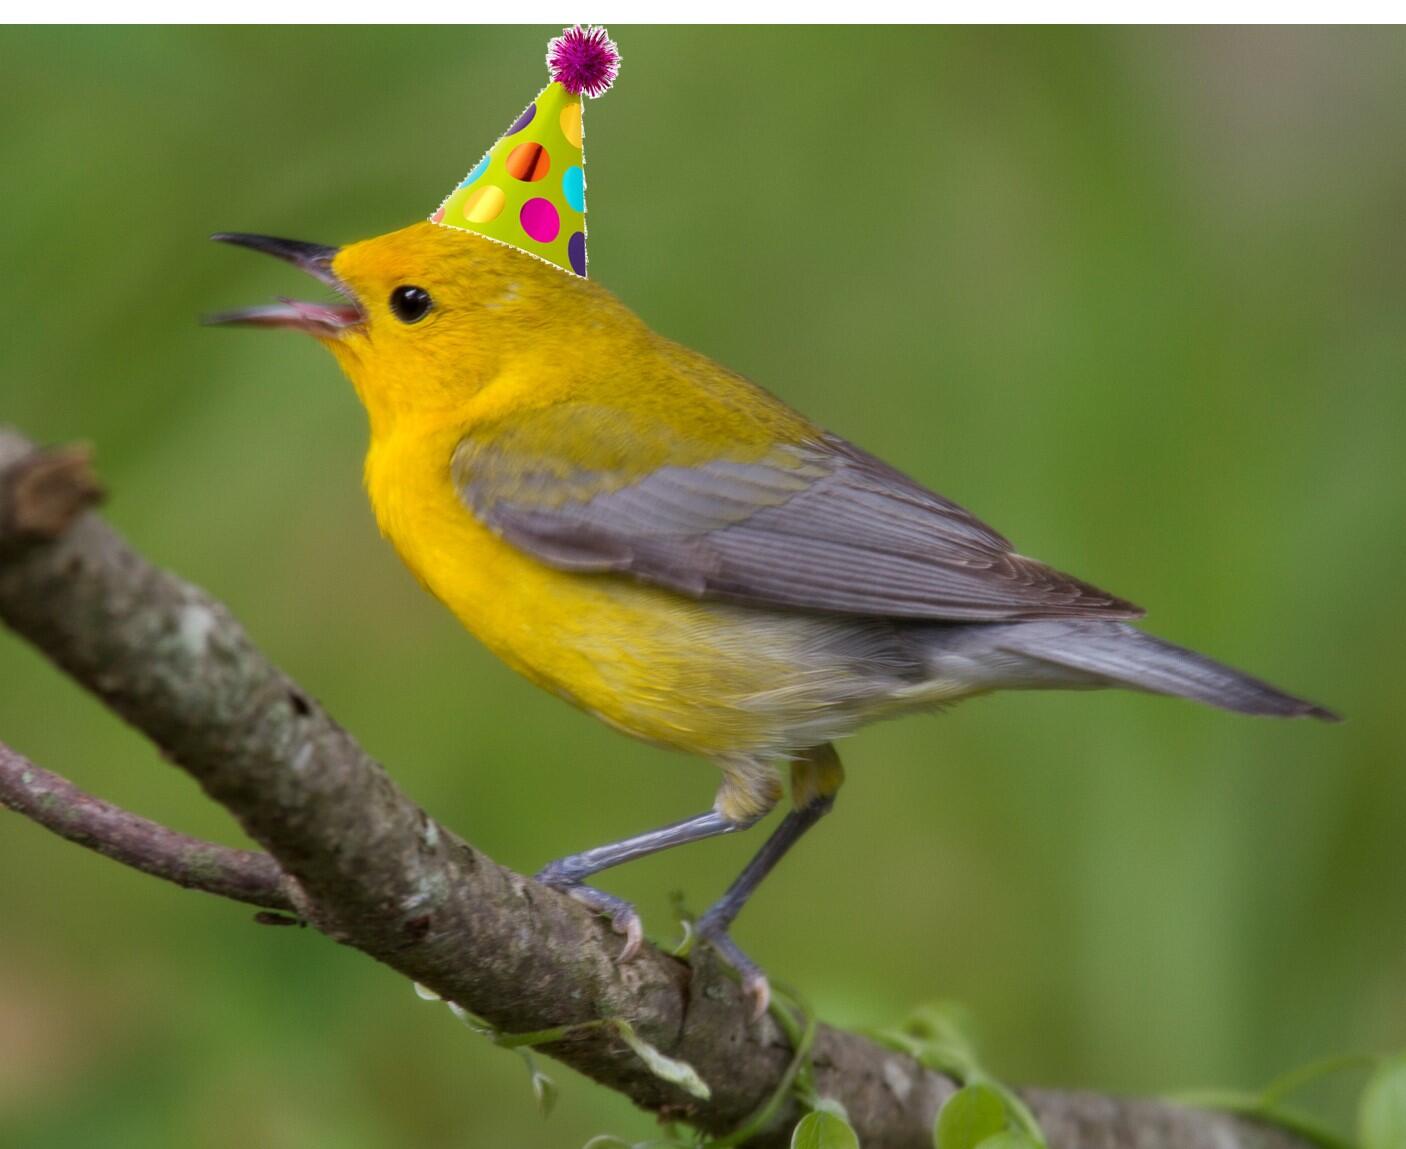 A Prothonotary Warbler on a branch with a party hat photoshopped on its head.